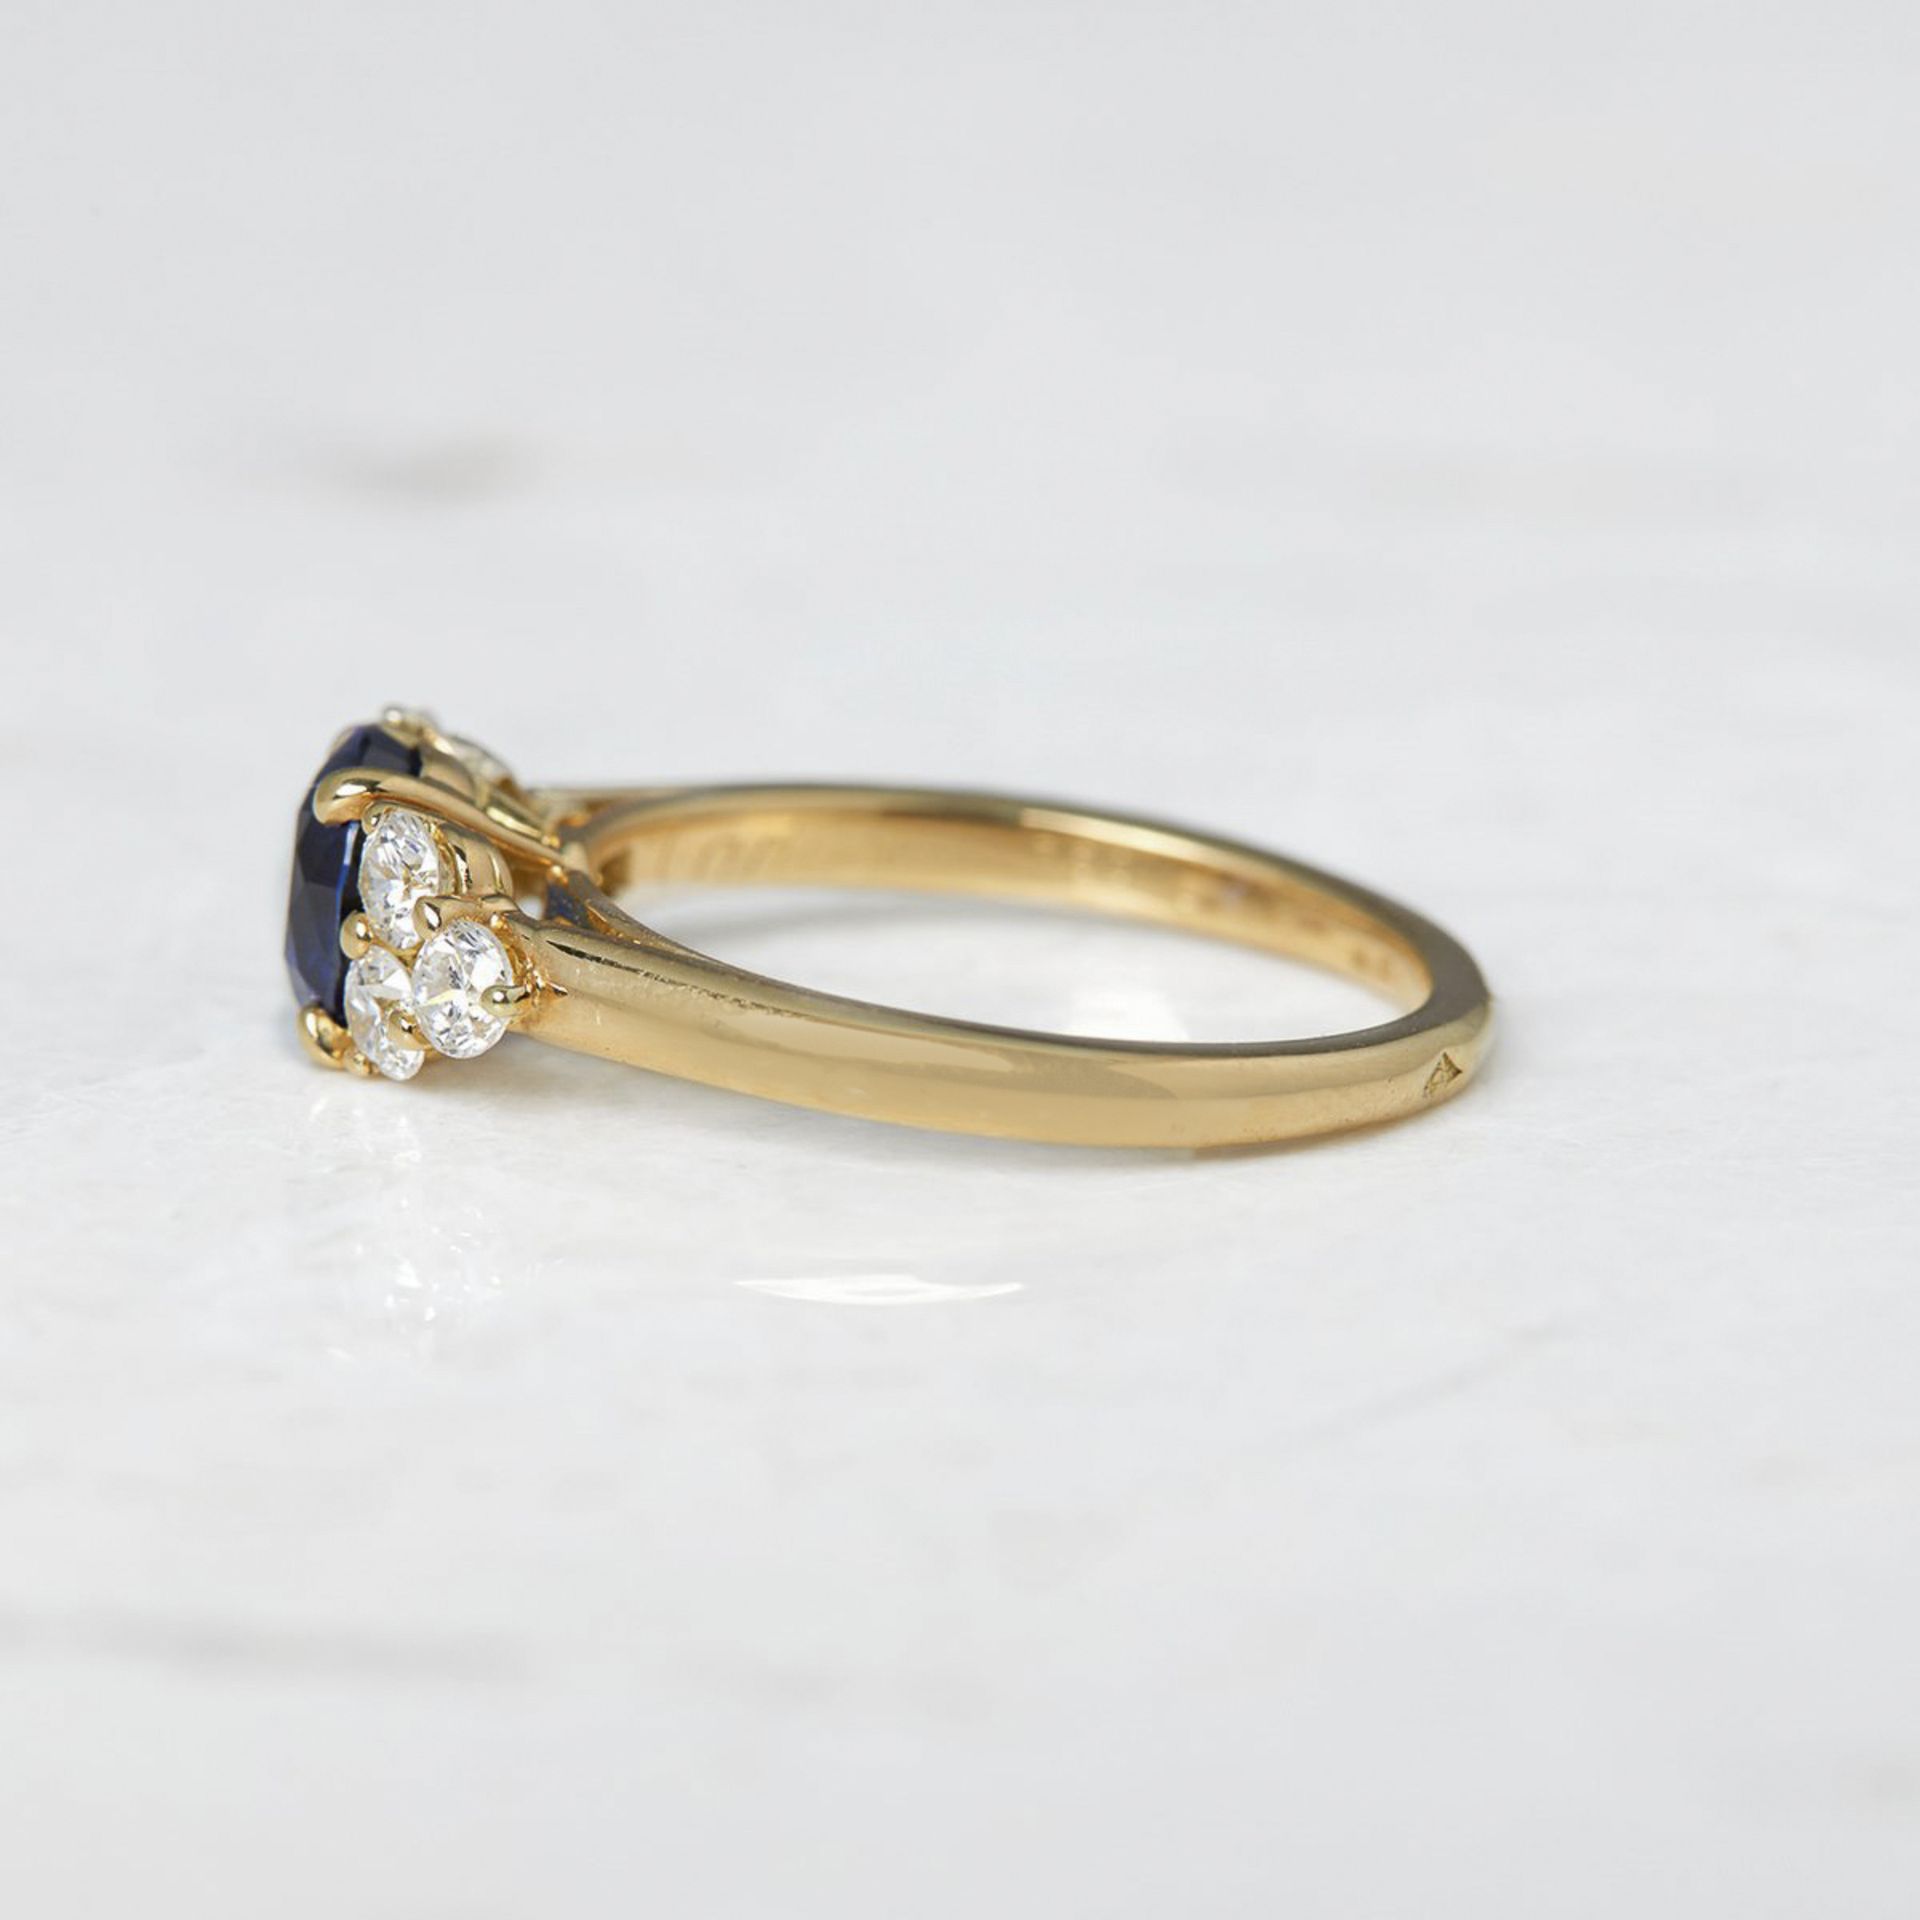 Cartier, 18k Yellow Gold 1.37ct Sapphire & 0.50ct Diamond Ring with Cartier Box & Cert / IGR Report - Image 4 of 12